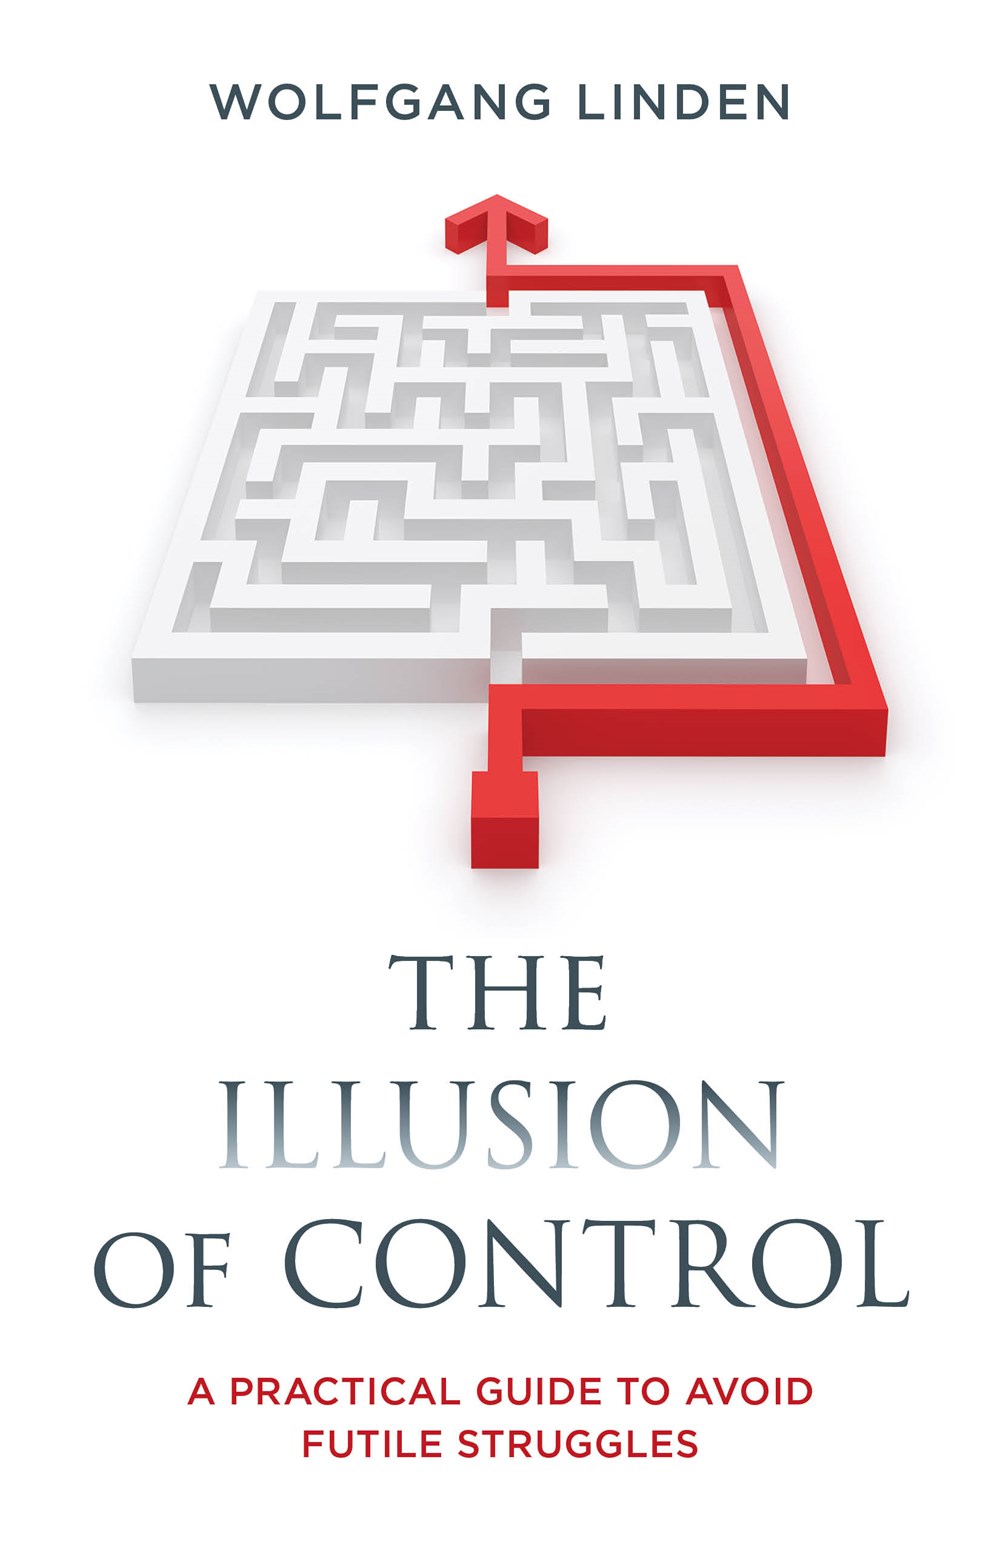 The Illusion of Control: A Practical Guide To Avoid Futile Struggles